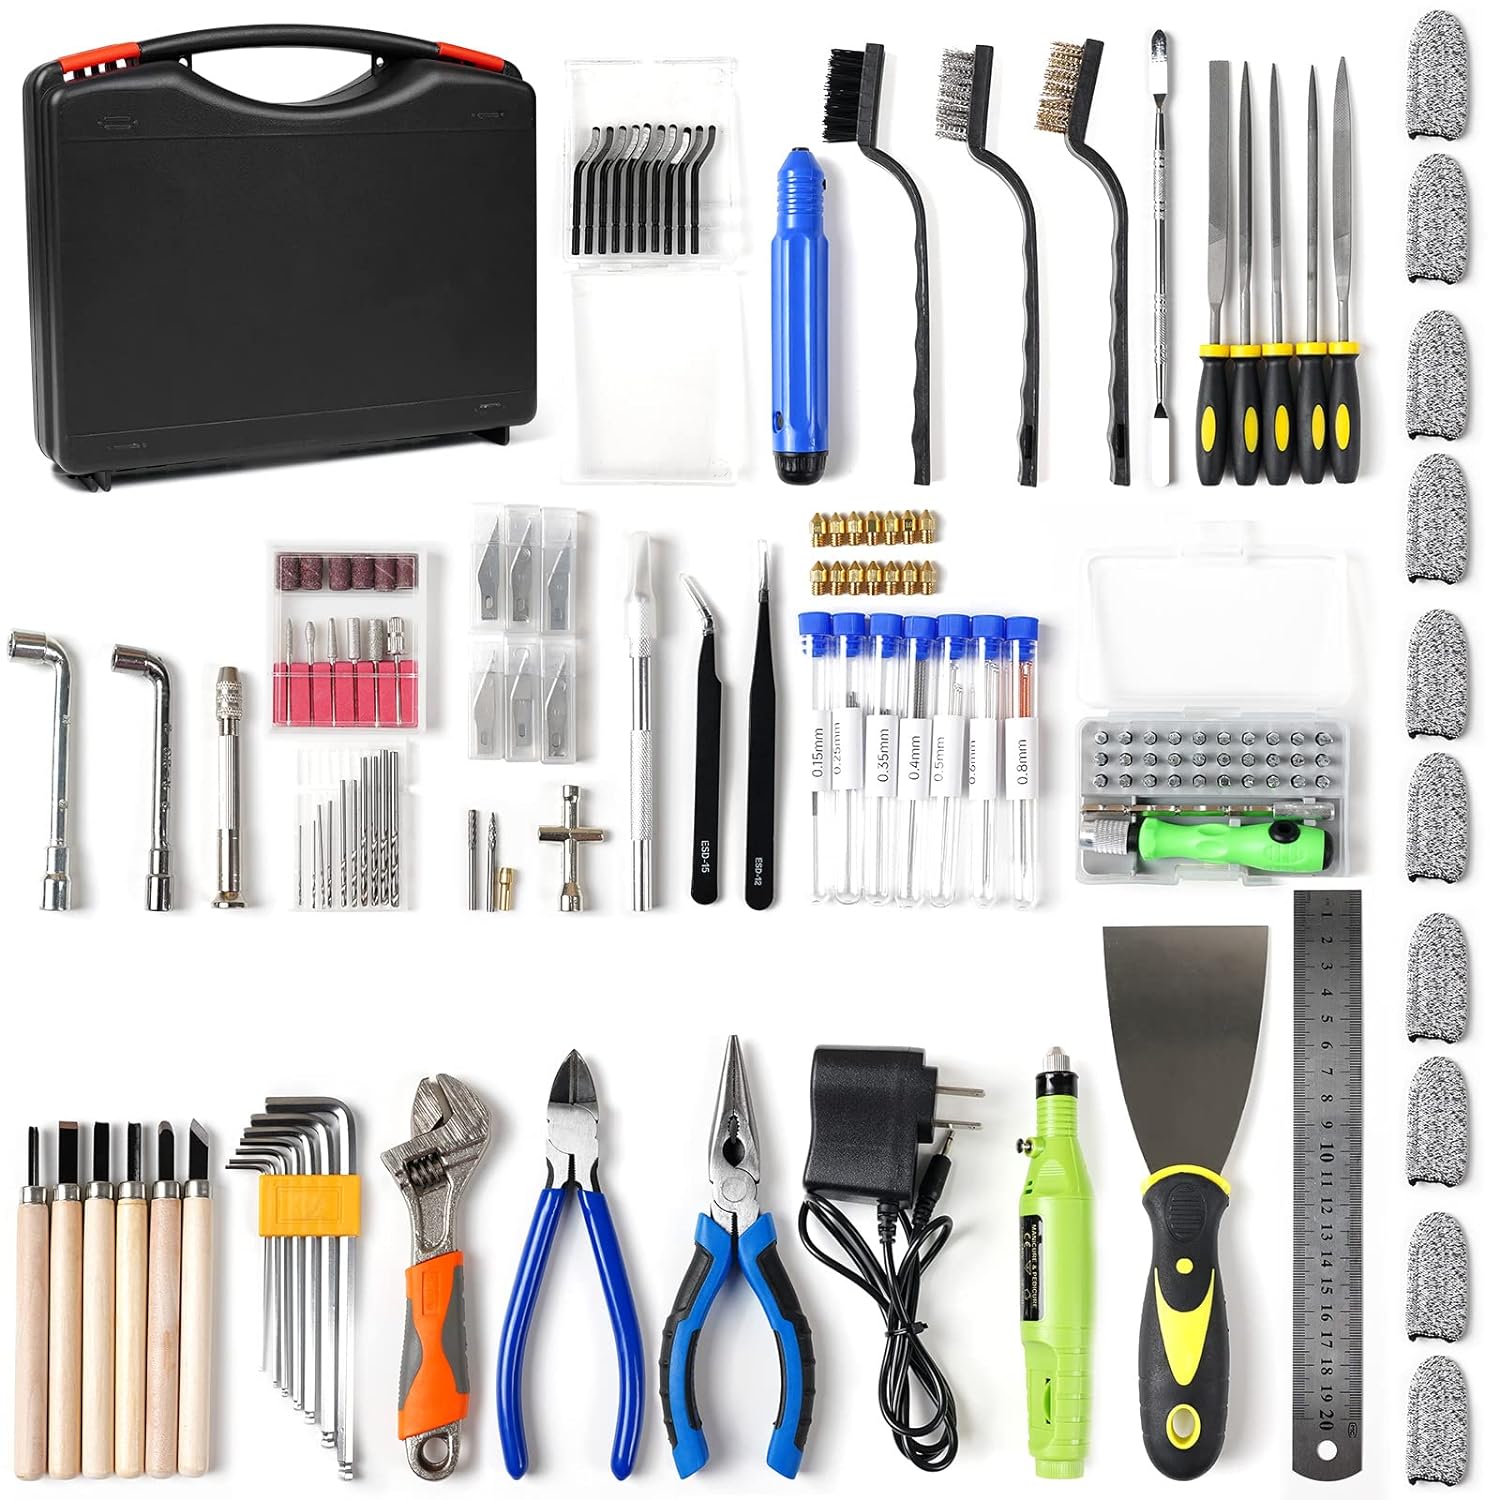 twotrees-244-piece-3d-printer-tool-kit-diverse-3d-printer-nozzle-cleaning-kit-and-repair-tool-set-including-tool-box-for Twotrees 244 Piece 3D Printer Tool Kit Review